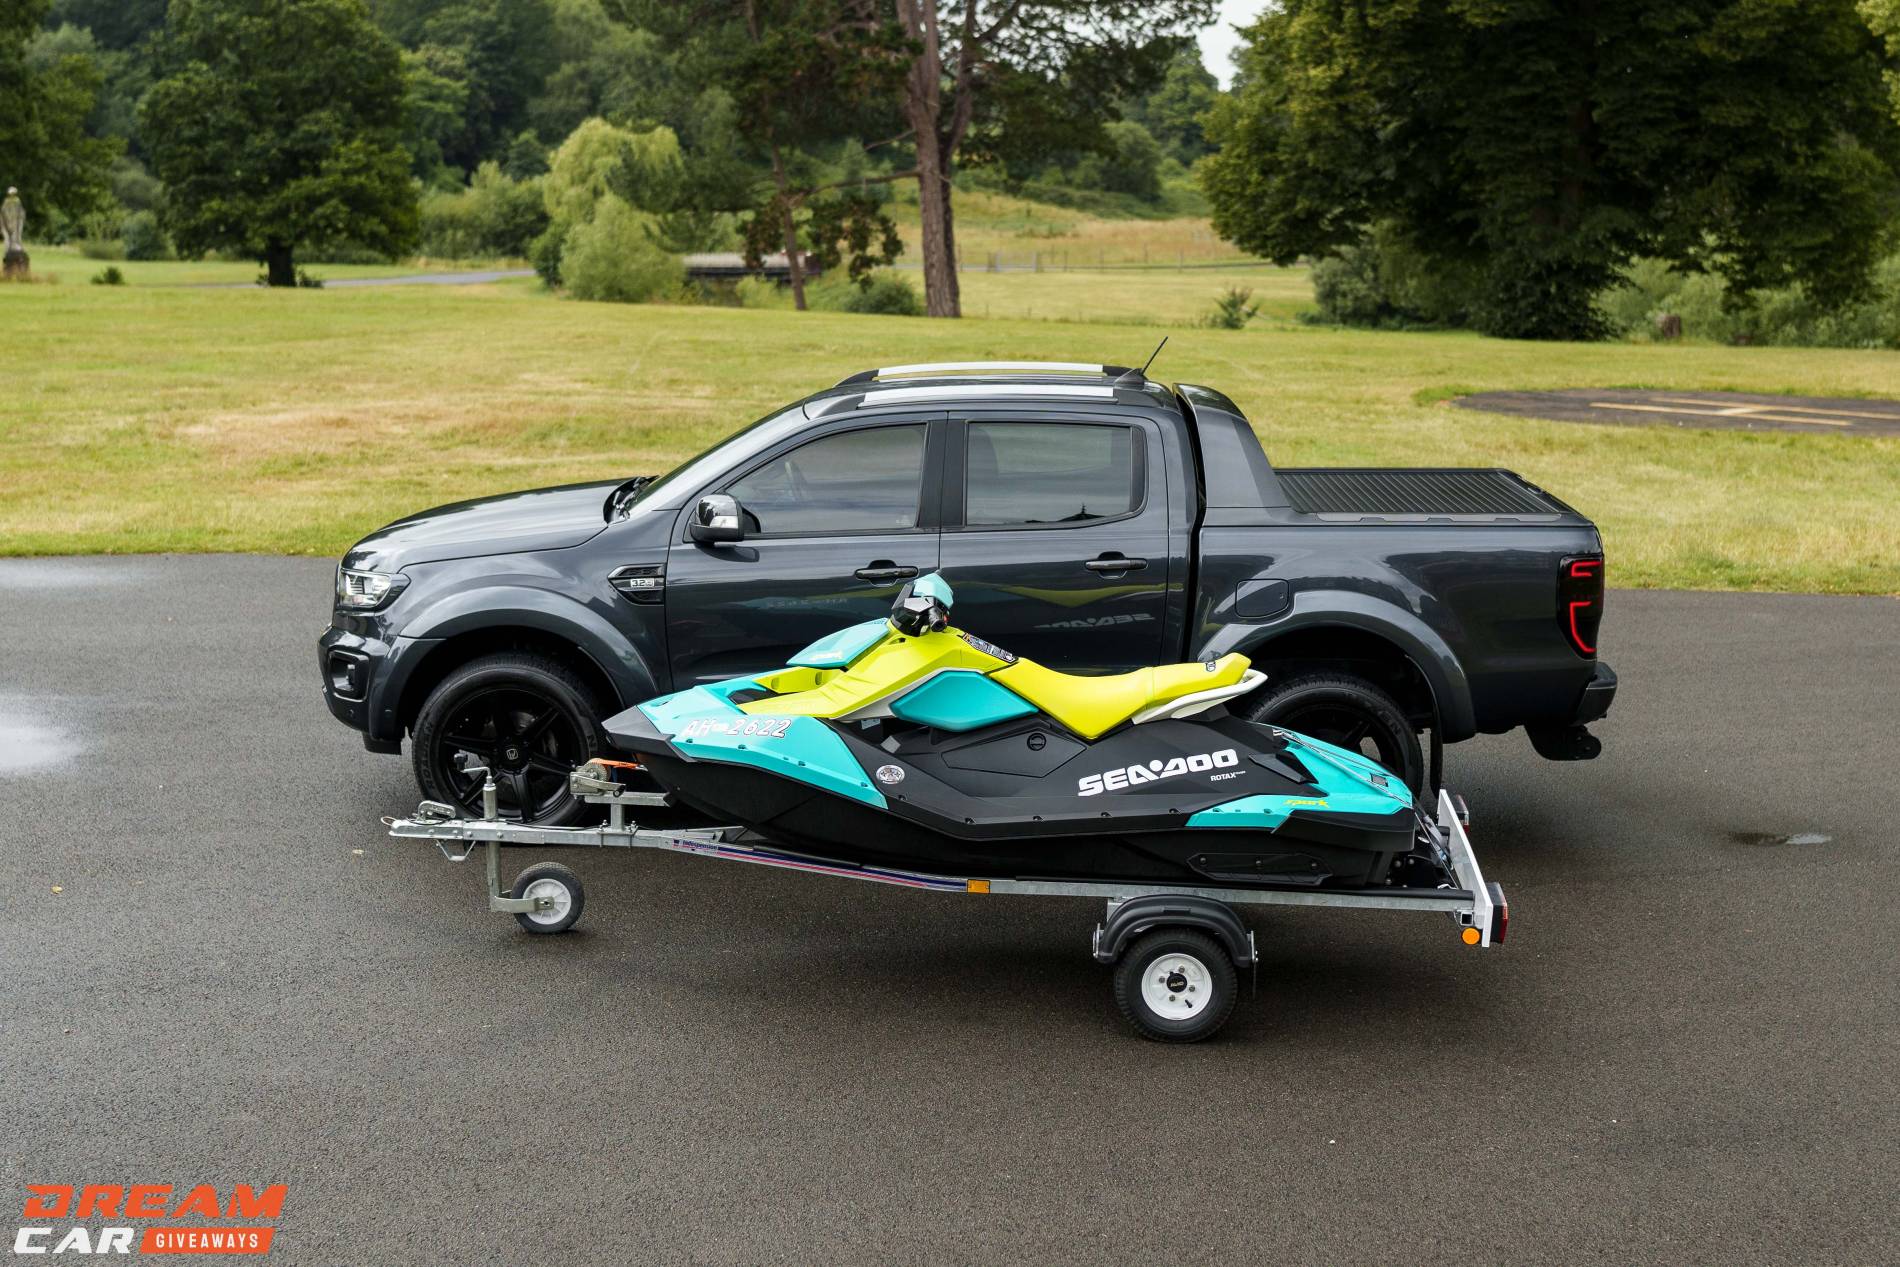 Win this Ford Ranger & Seadoo Spark Jet Ski & £1,000 or £35,500 Tax Free